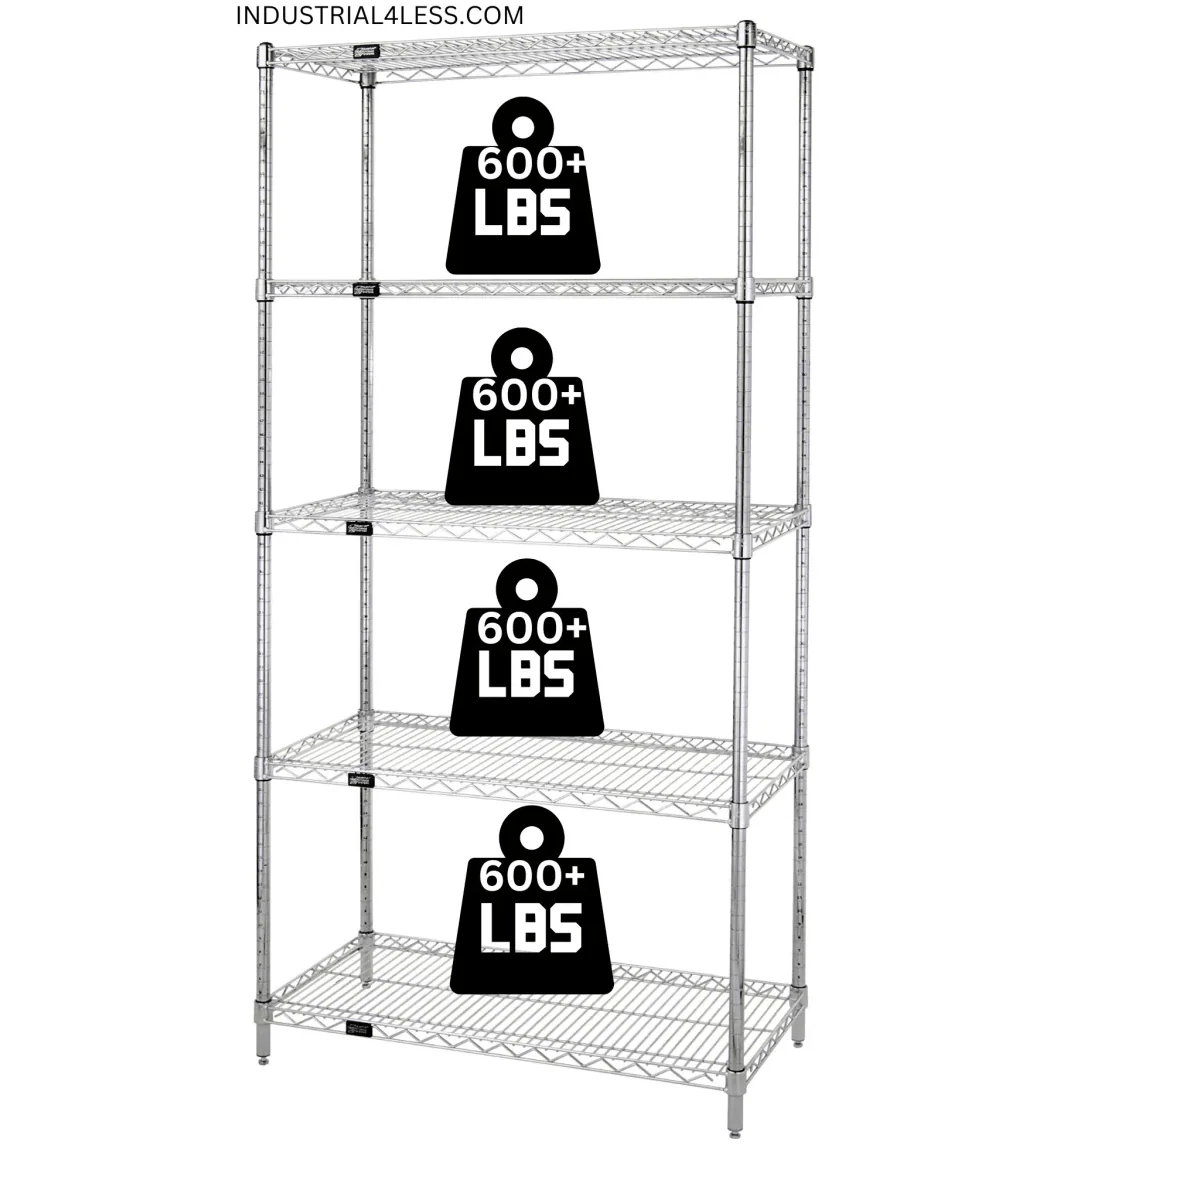 21" x 30" Stainless Steel Wire Shelving Unit - Industrial 4 Less - 21305S-5